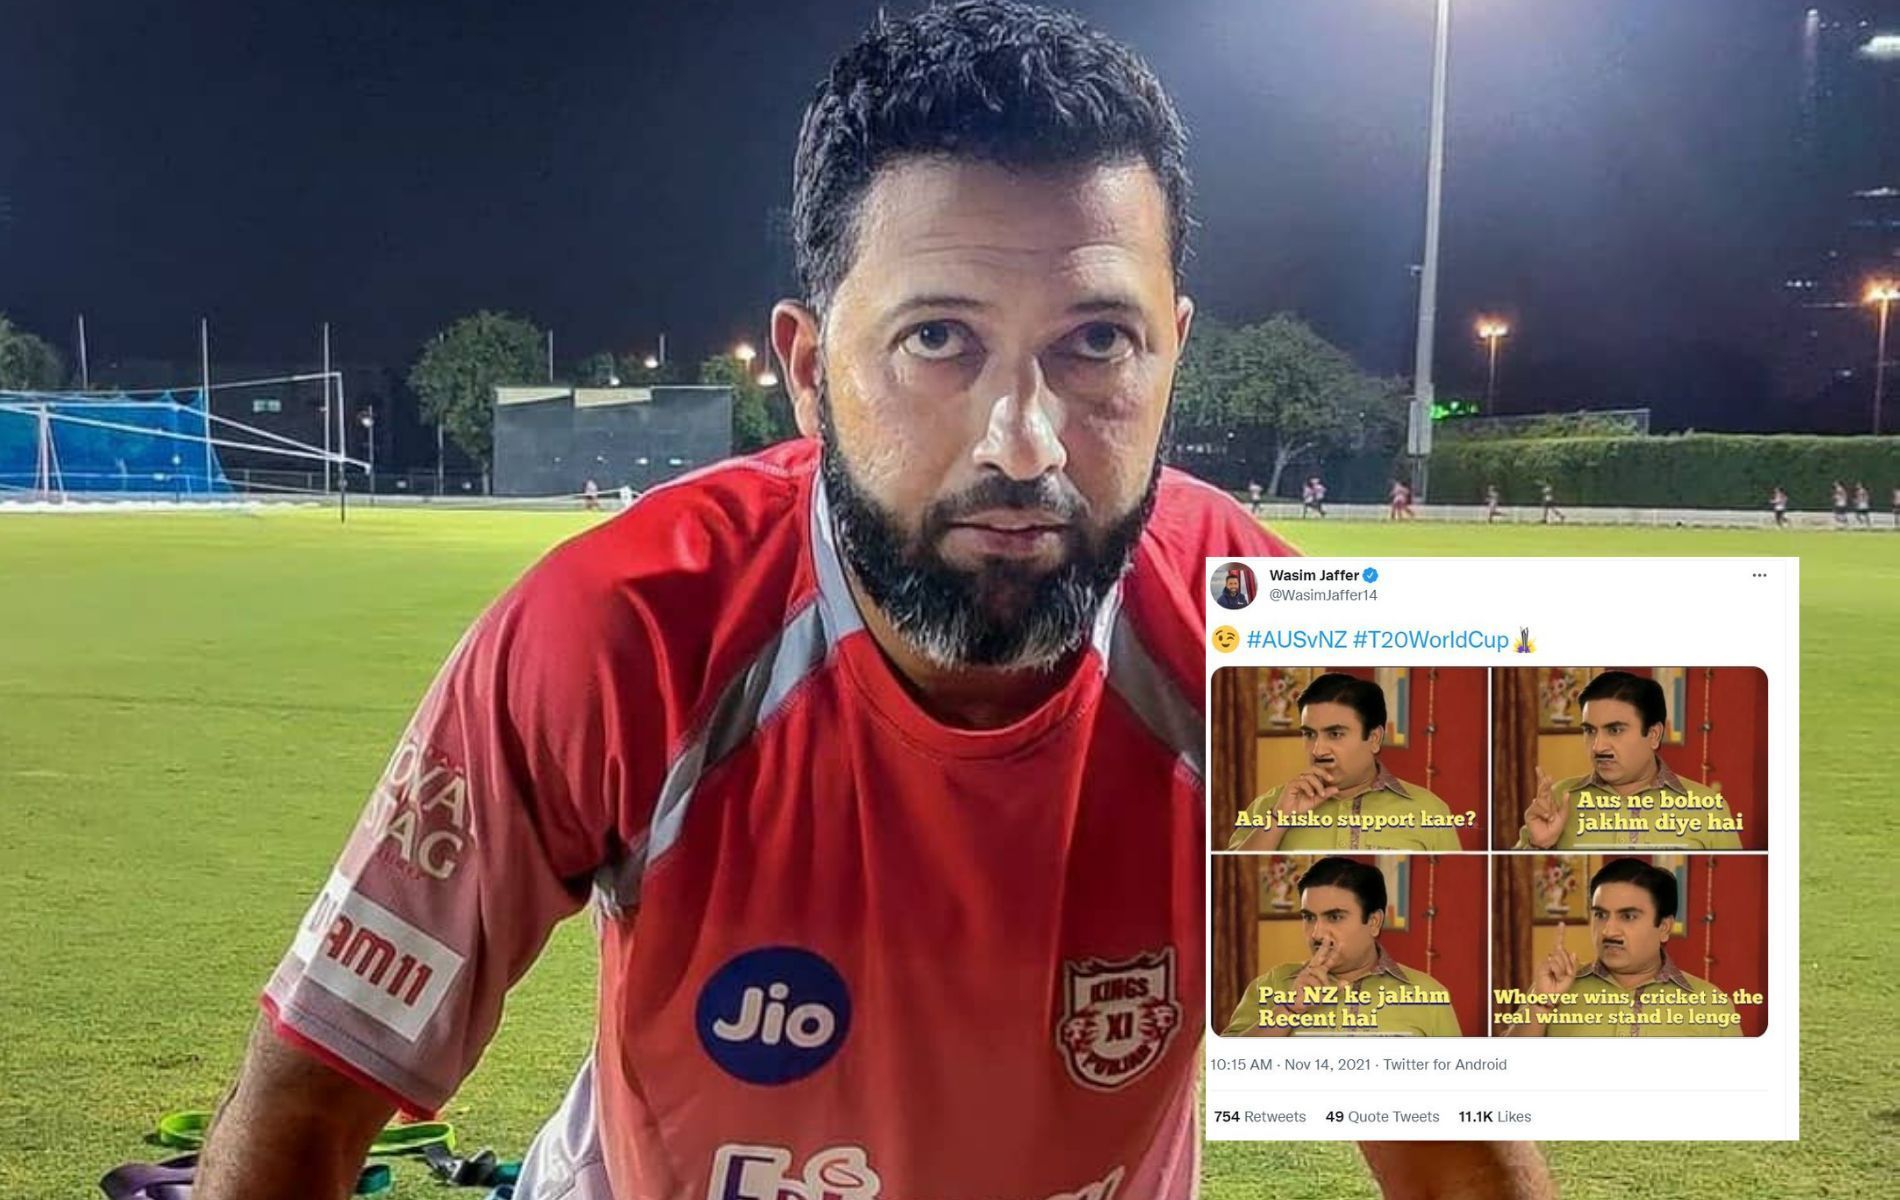 Wasim Jaffer posts a funny meme ahead of the T20 World Cup 2021 final